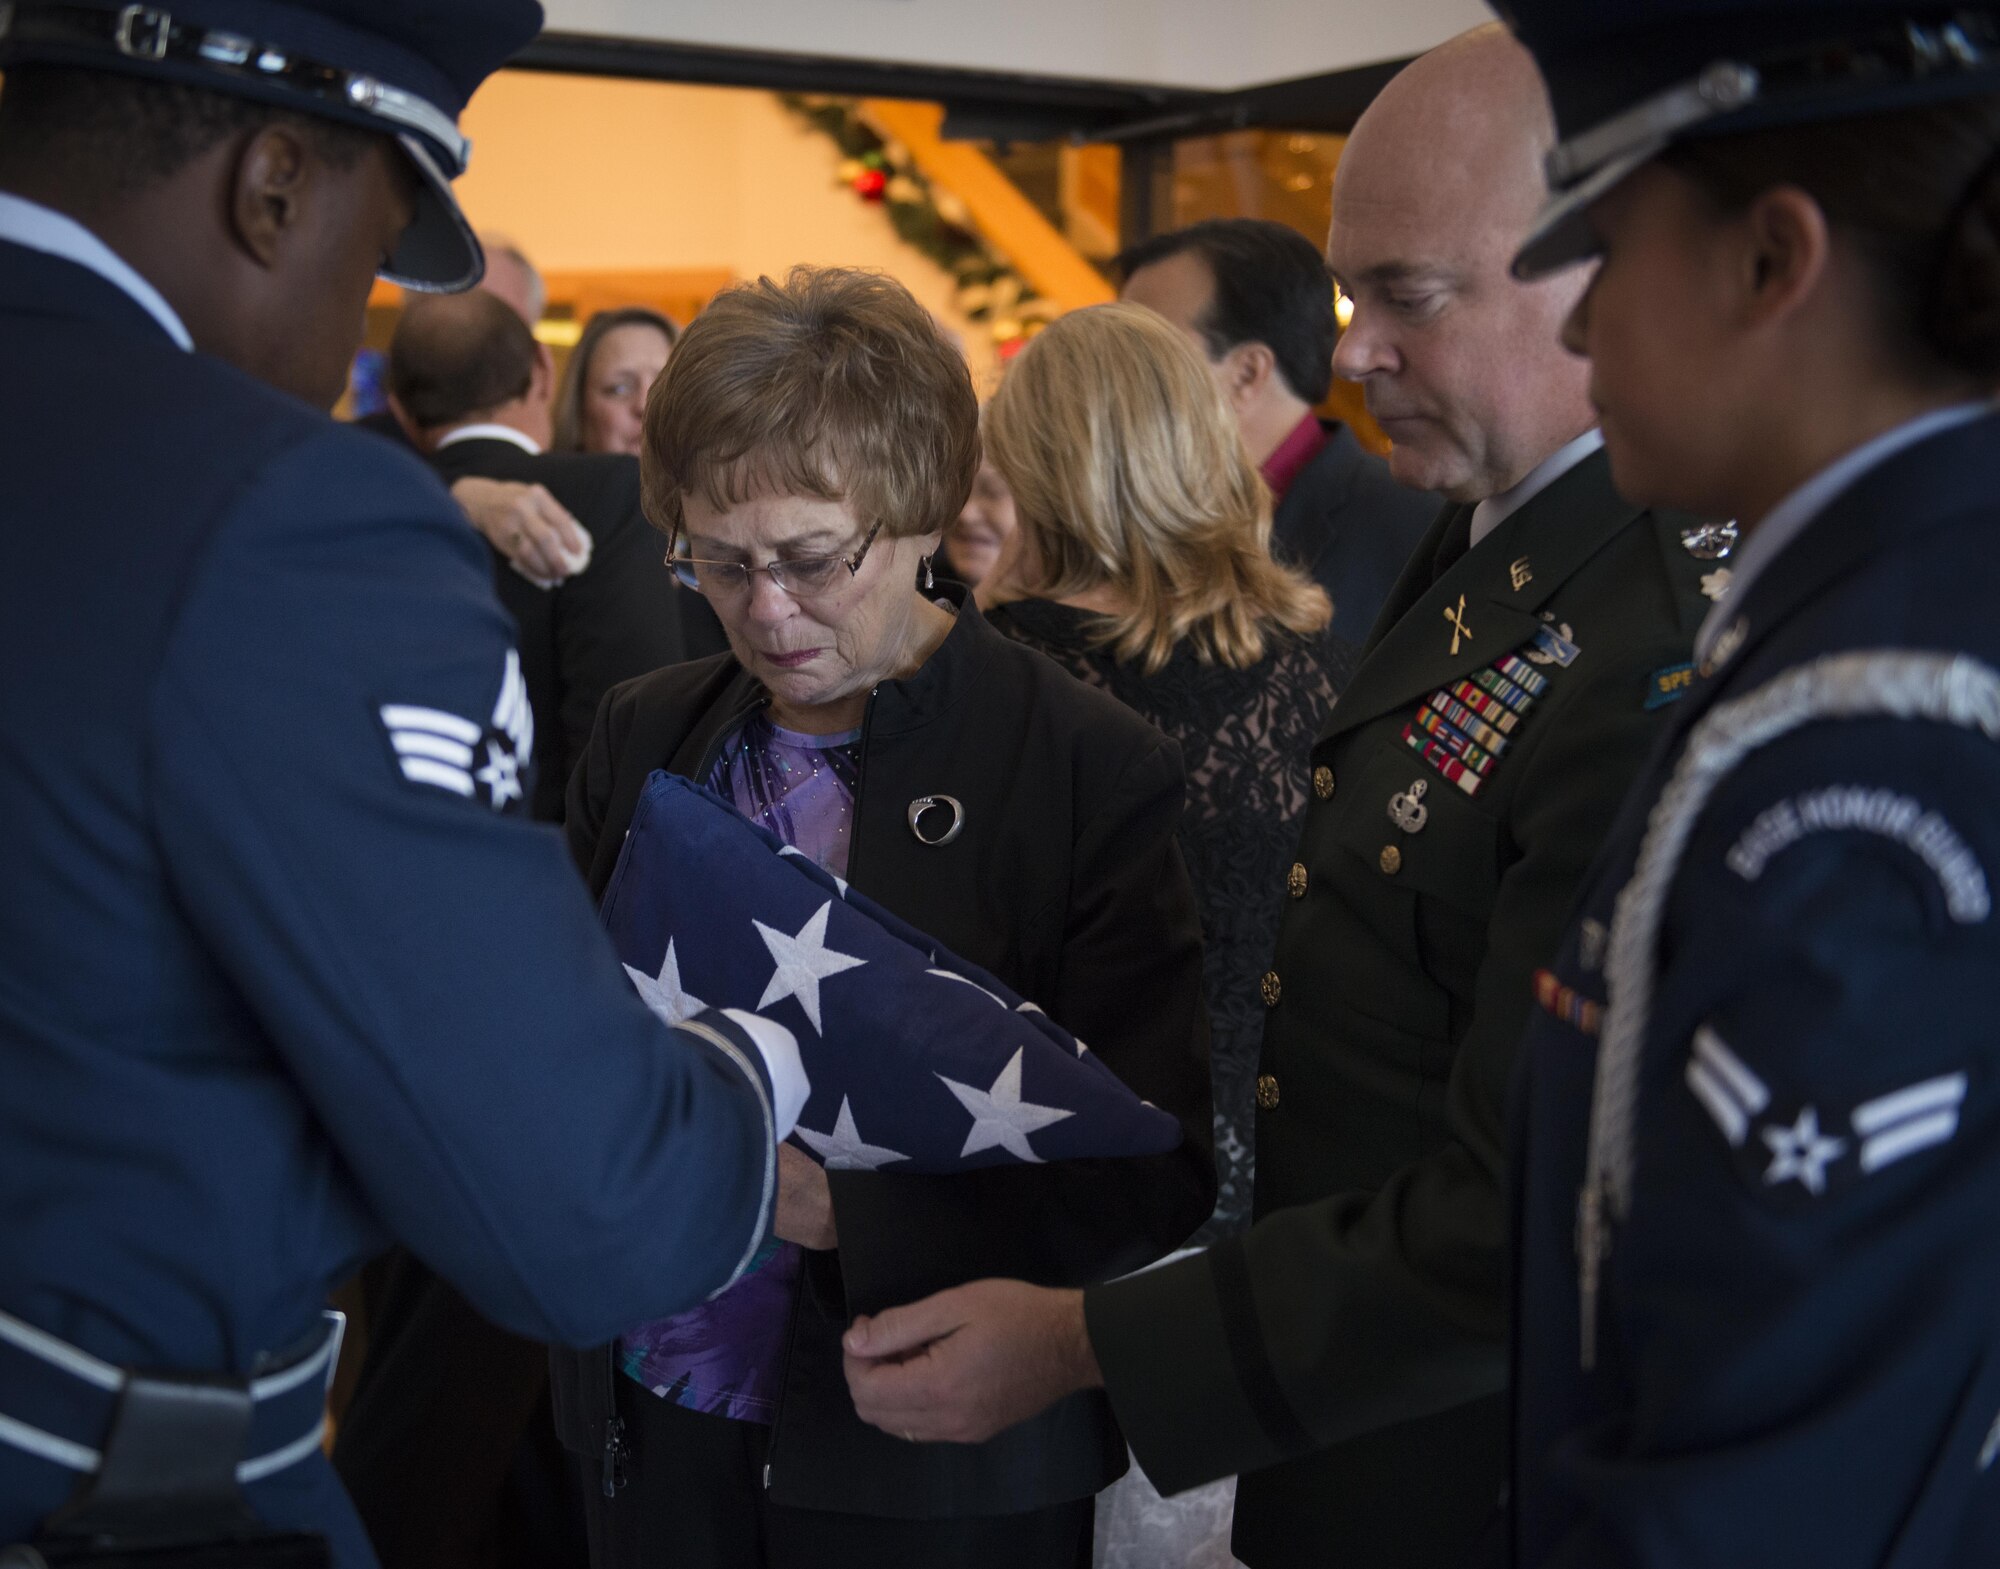 The Eglin Air Force Base Honor Guard presents the empty bullet shells to Judy Haugen, the widow of retired Brig. Gen. Donald Haugen, during a memorial ceremony for retired Reserve Brig. Gen. Donald Haugen Dec. 5 at Crosspoint Methodist Church in Niceville, Fla.  The 84-year-old Haugen, who passed away Dec. 1, was the first commander of a 919th designated unit assigned to Duke Field, the 919th Tactical Airlift Group.  The designation still resides there today with the special operations Reserve unit, 919th Special Operations Wing, still resides there today.  Many of the tactical airlift capabilities that began under his leadership are still part of the current 919th SOW mission.  (U.S. Air Force photo/Tech. Sgt. Jasmin Taylor)